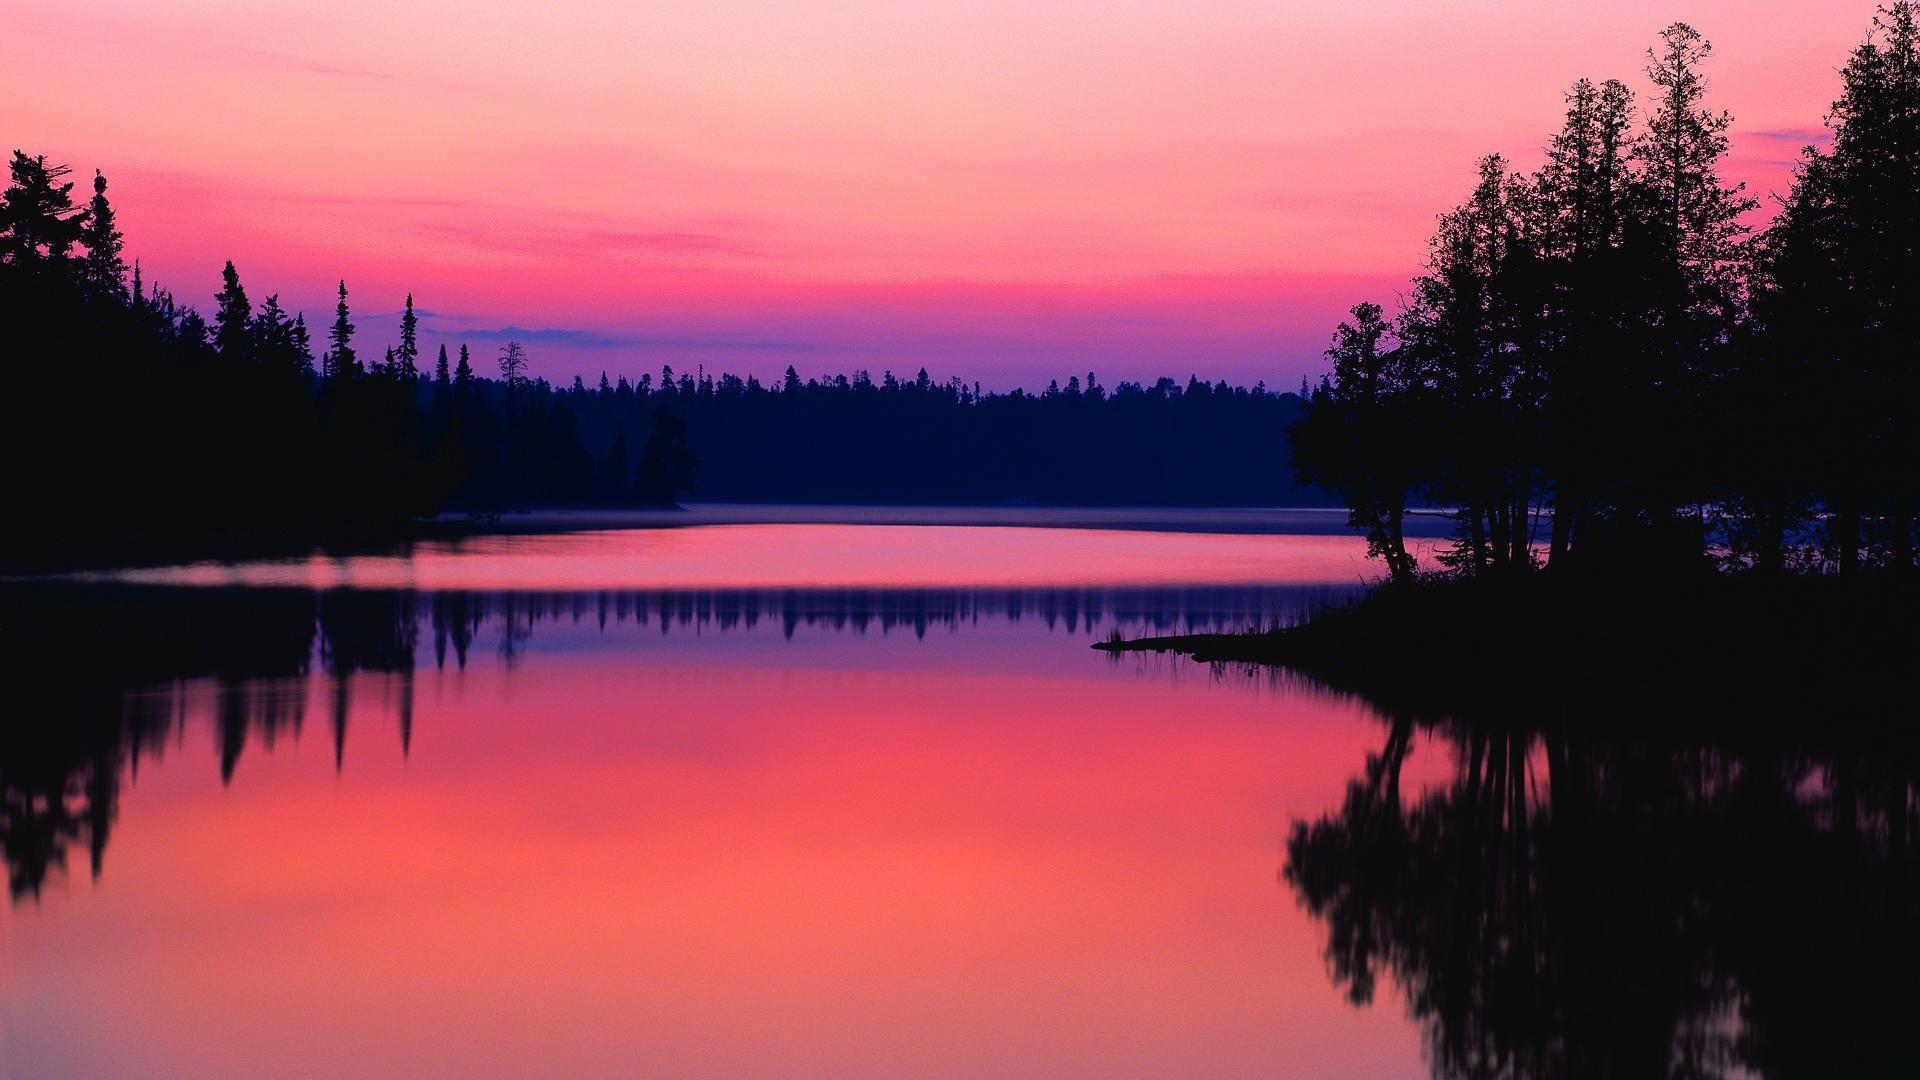 hd nature backgrounds sunset pink calm